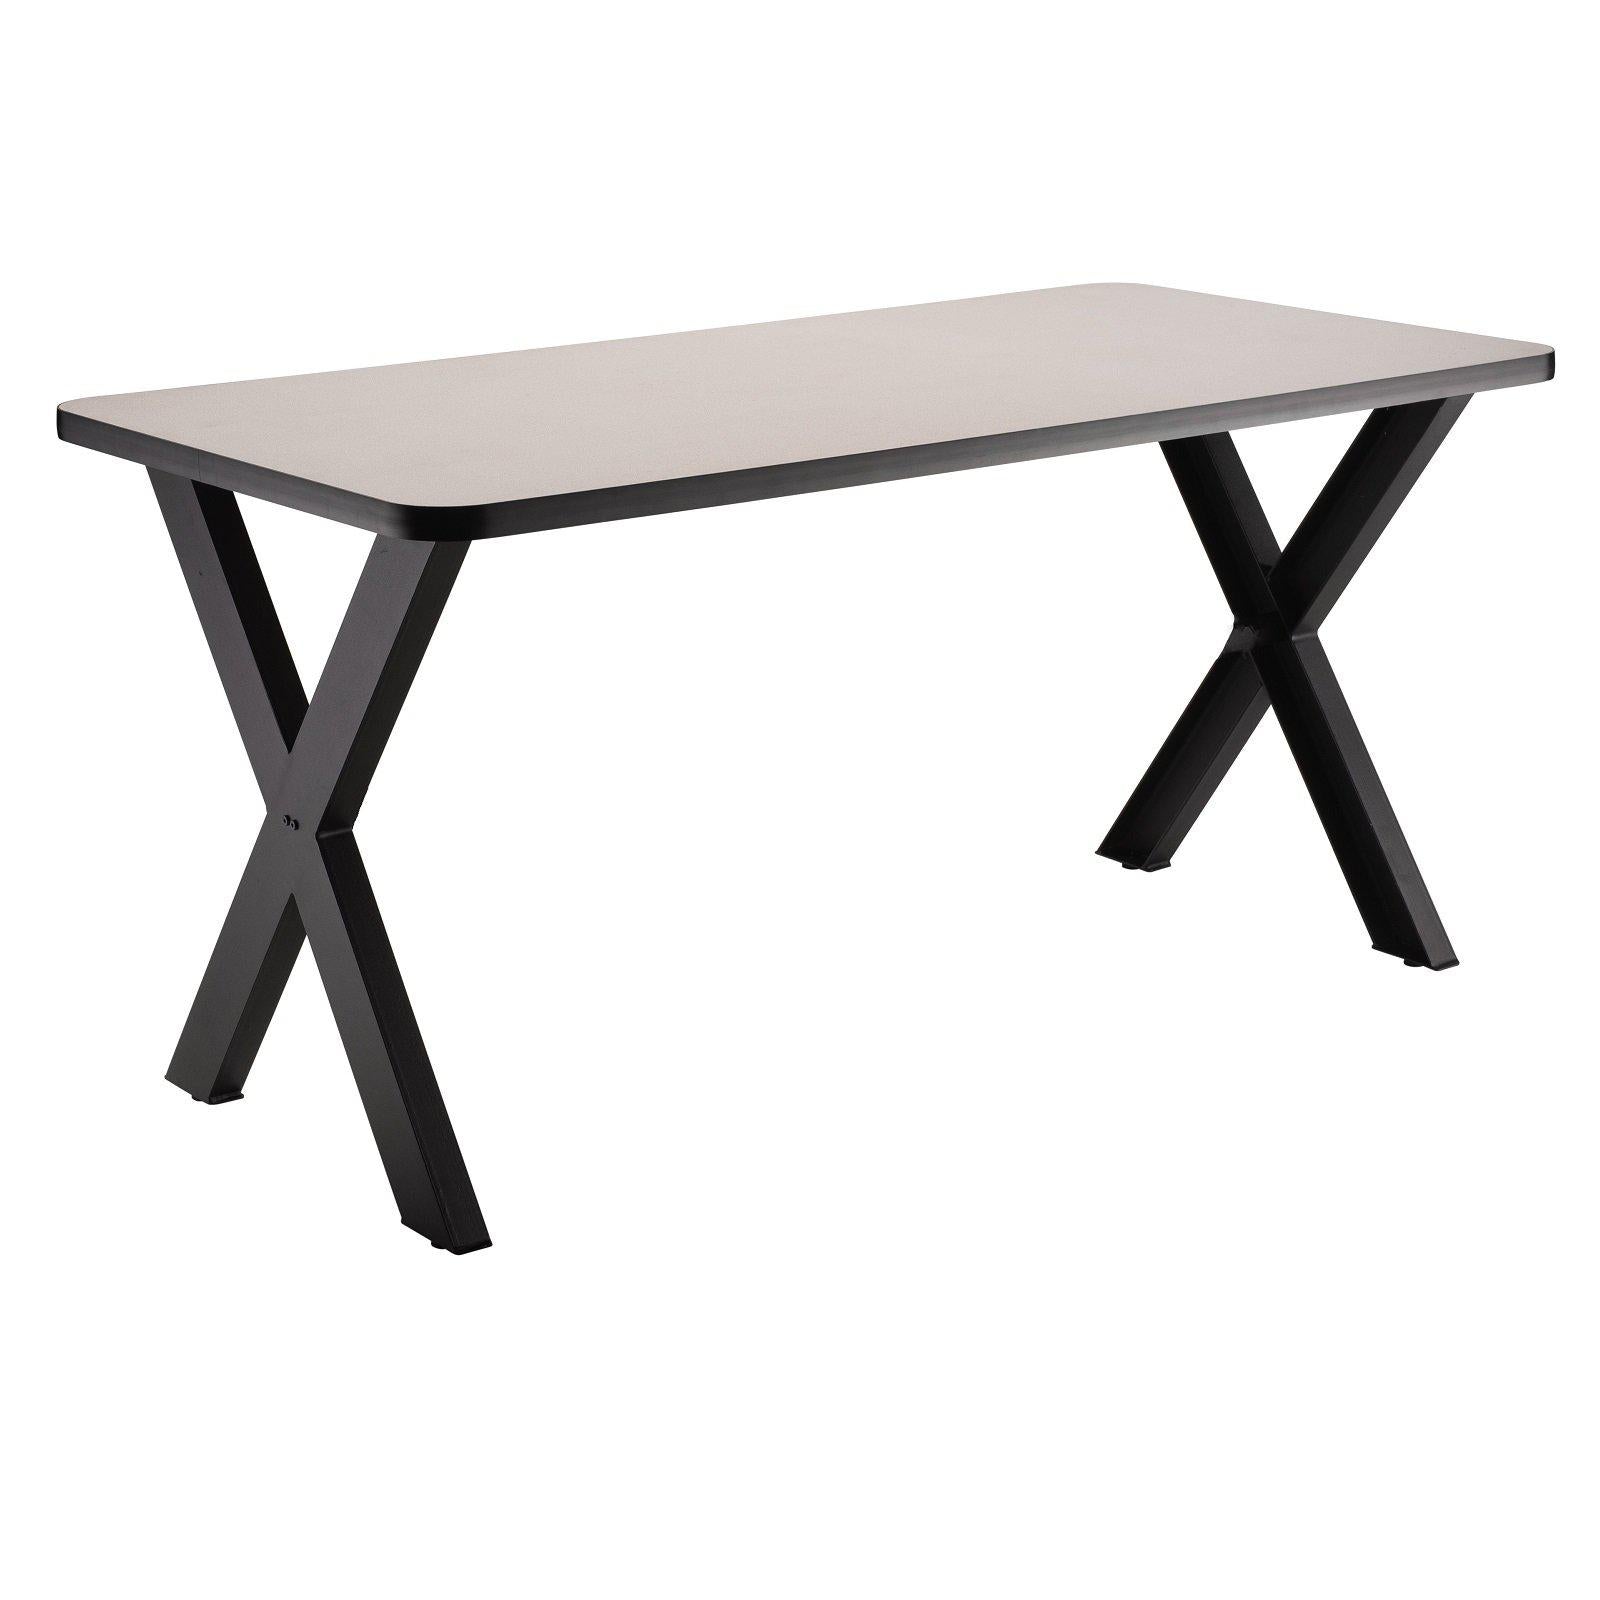 Collaborator Table, 36" x 60", Rectangle, 30" Dining Height, High Pressure Laminate Top, MDF Core